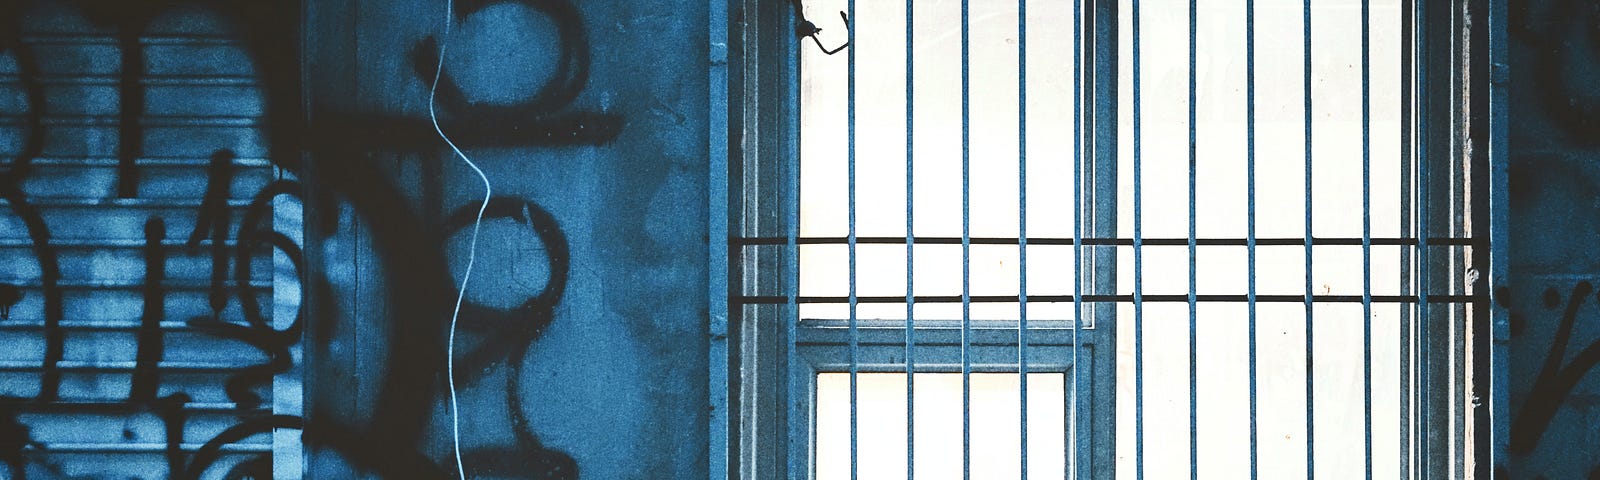 Photo of window with bars. Wall next to window is covered with grafitti.